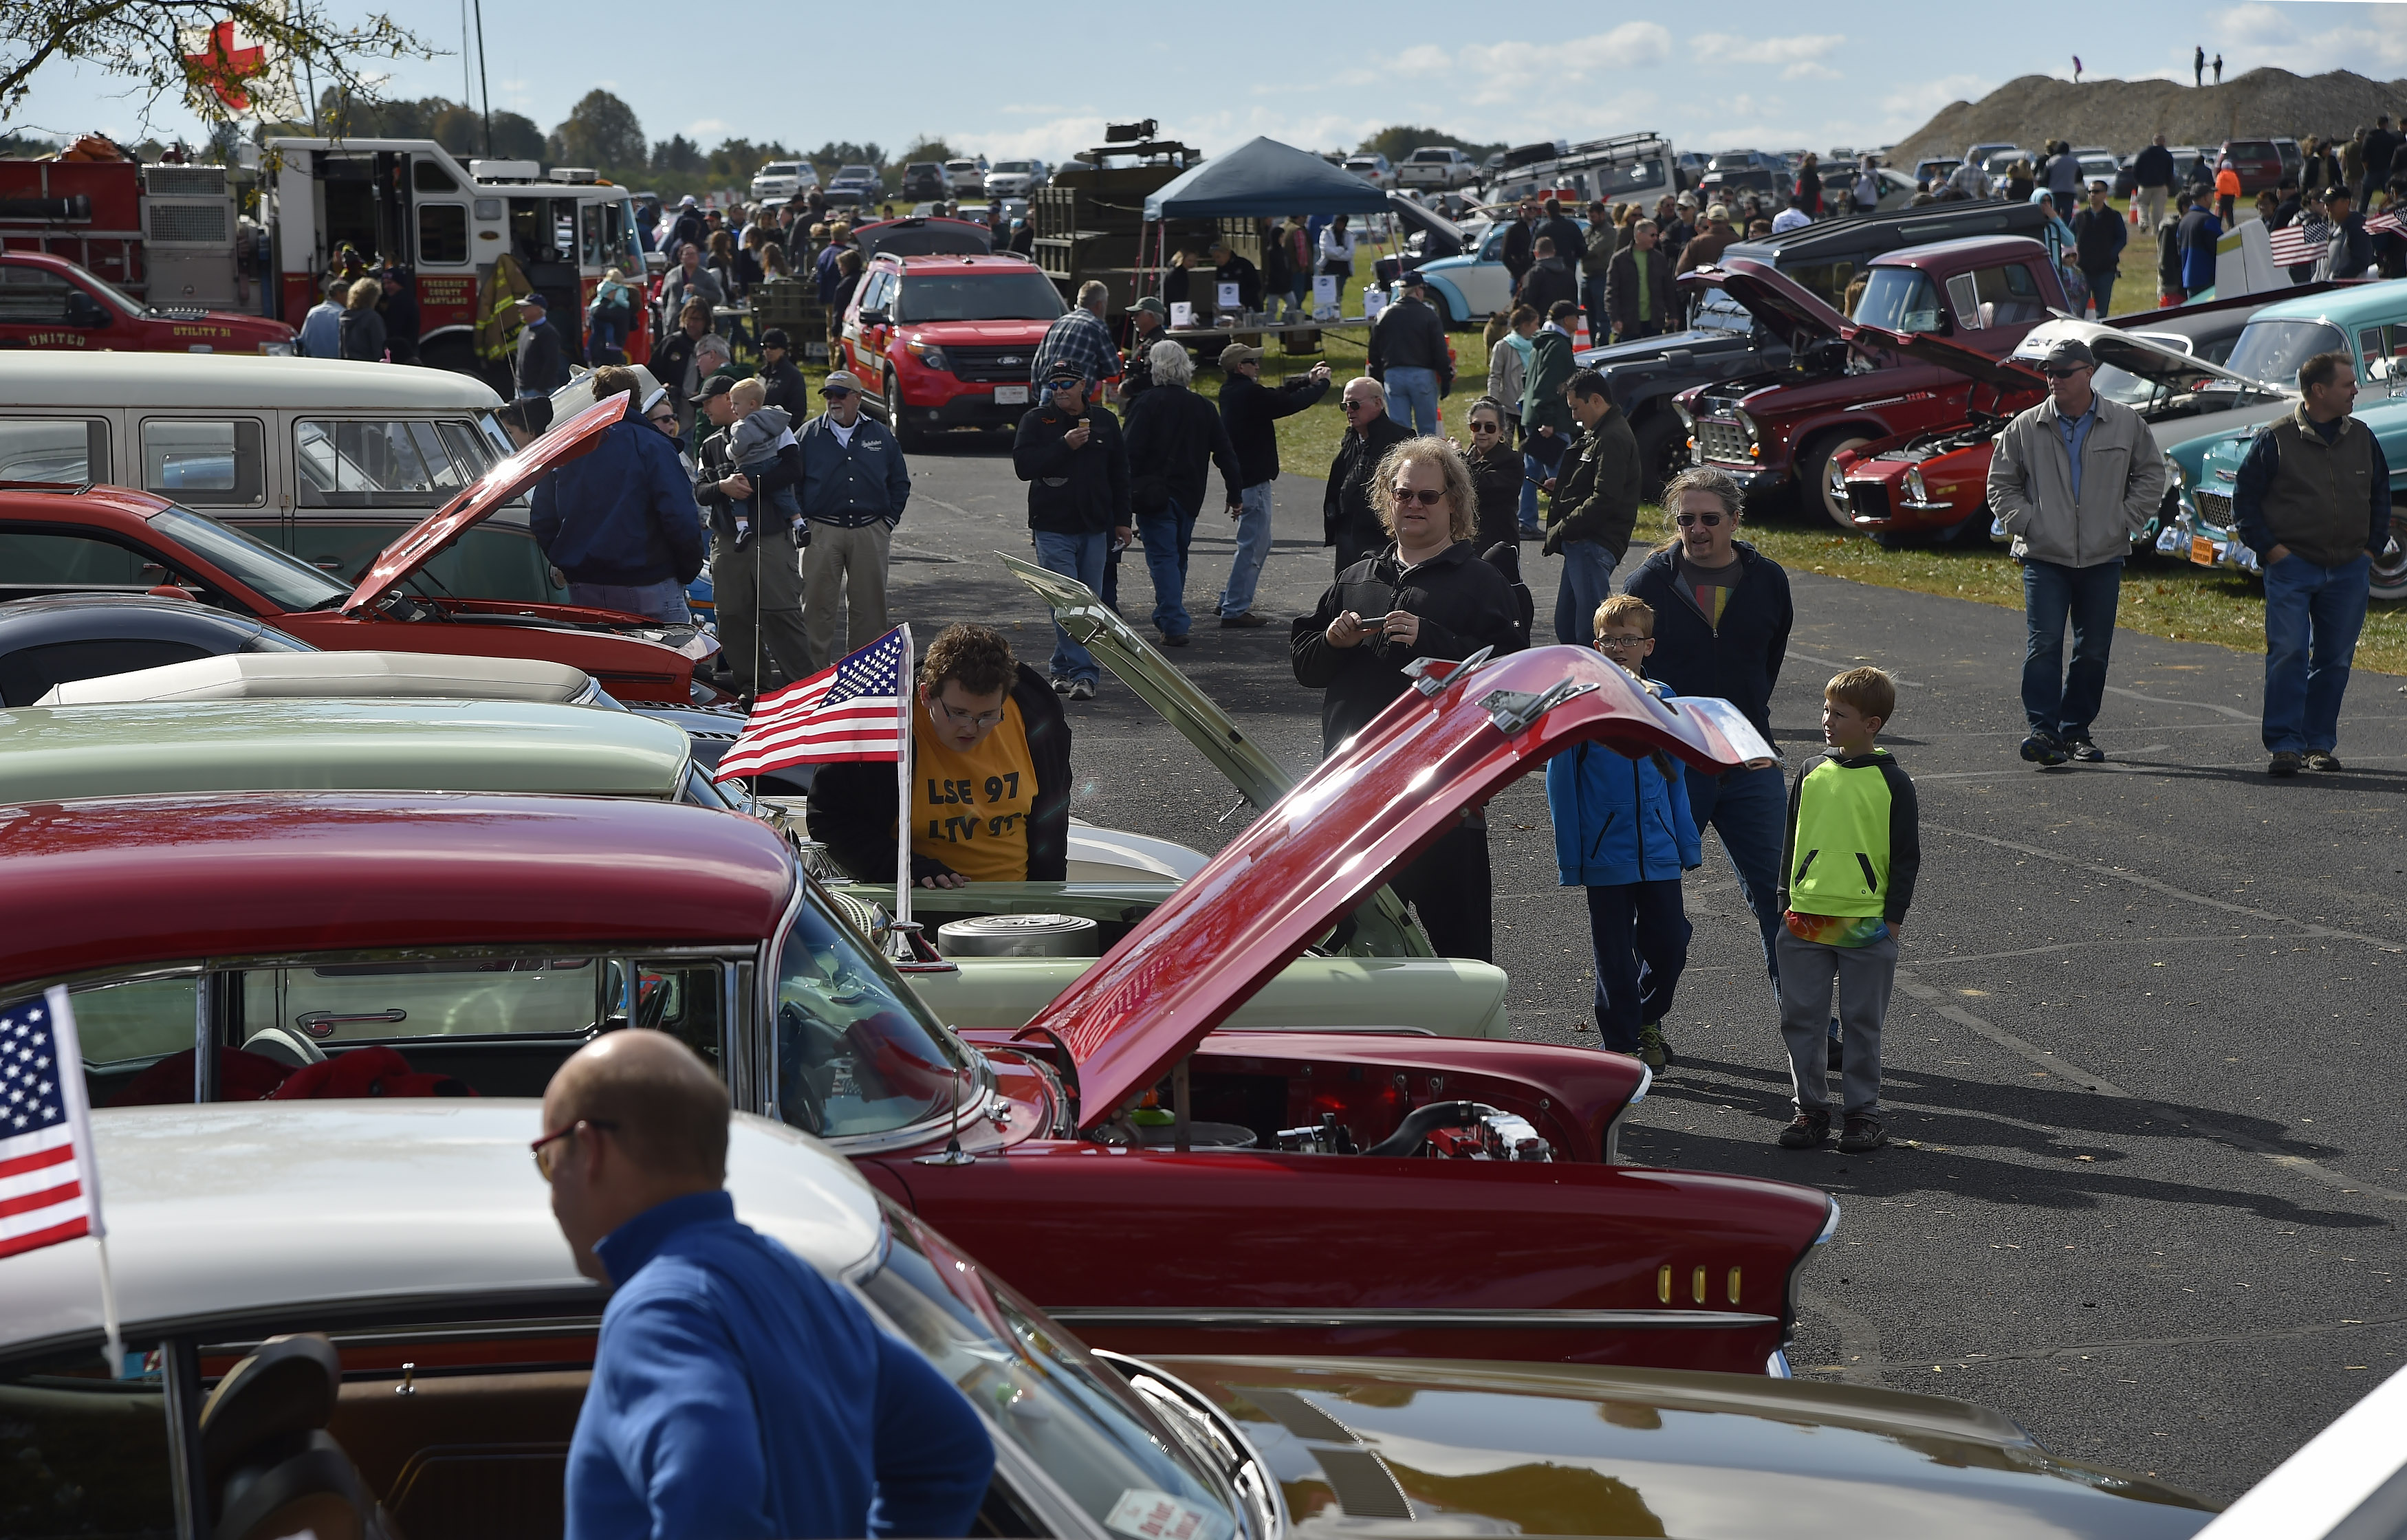 Wings 'n Wheels attendees check out some of the 75 classic and custom cars that joined 18 aircraft and 50 motorcycles showcased at the event. Photo by David Tulis.